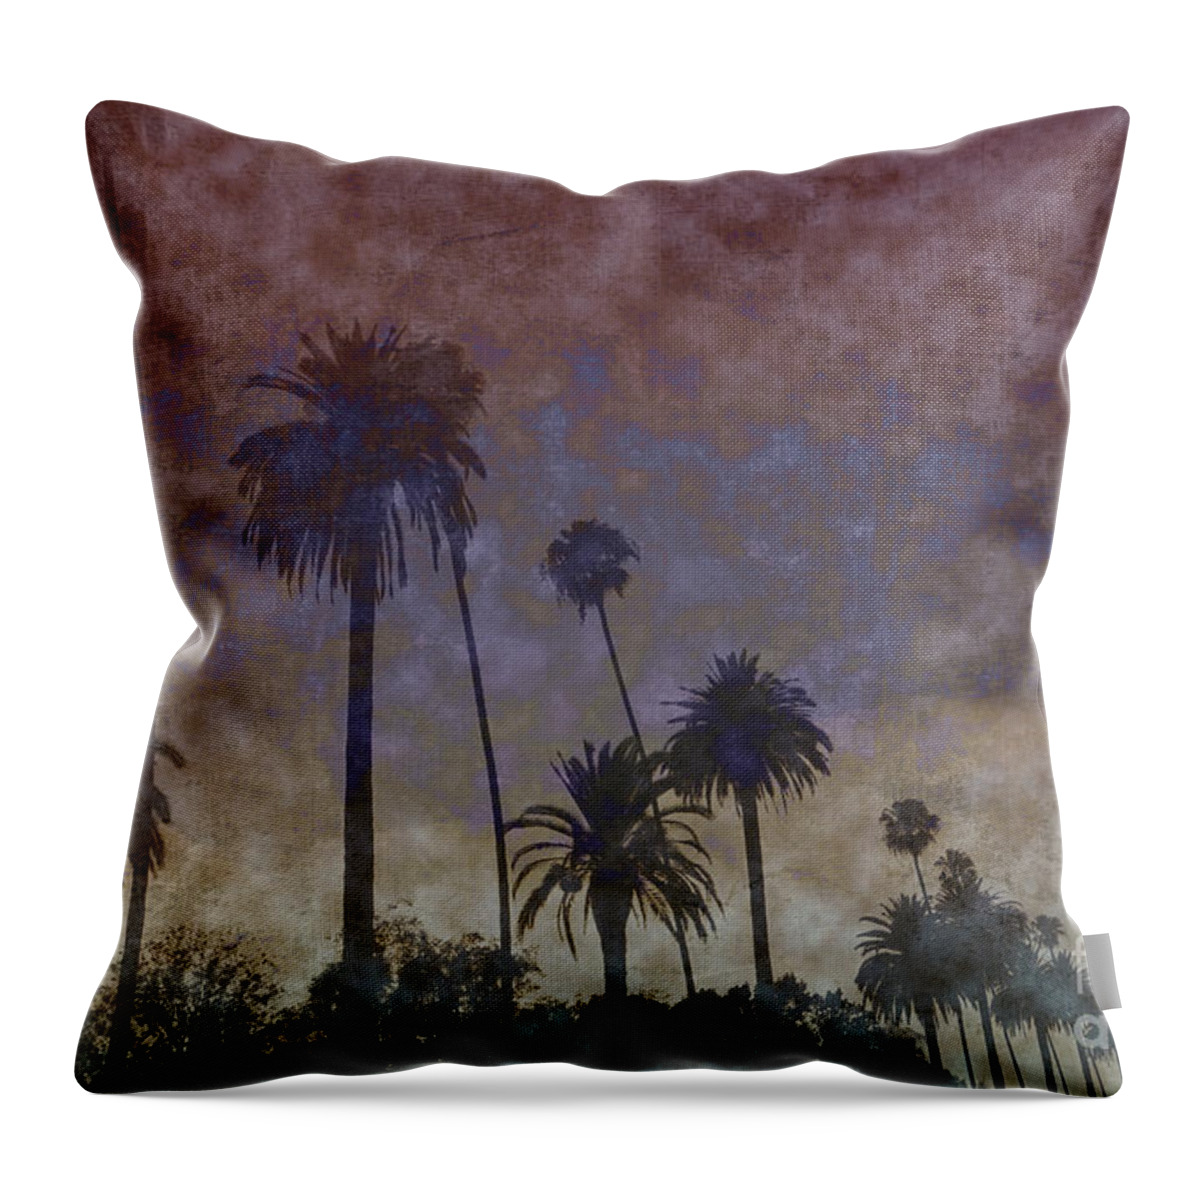 Abstract Palm Trees Throw Pillow featuring the photograph Abstract Palm Trees by Nina Prommer